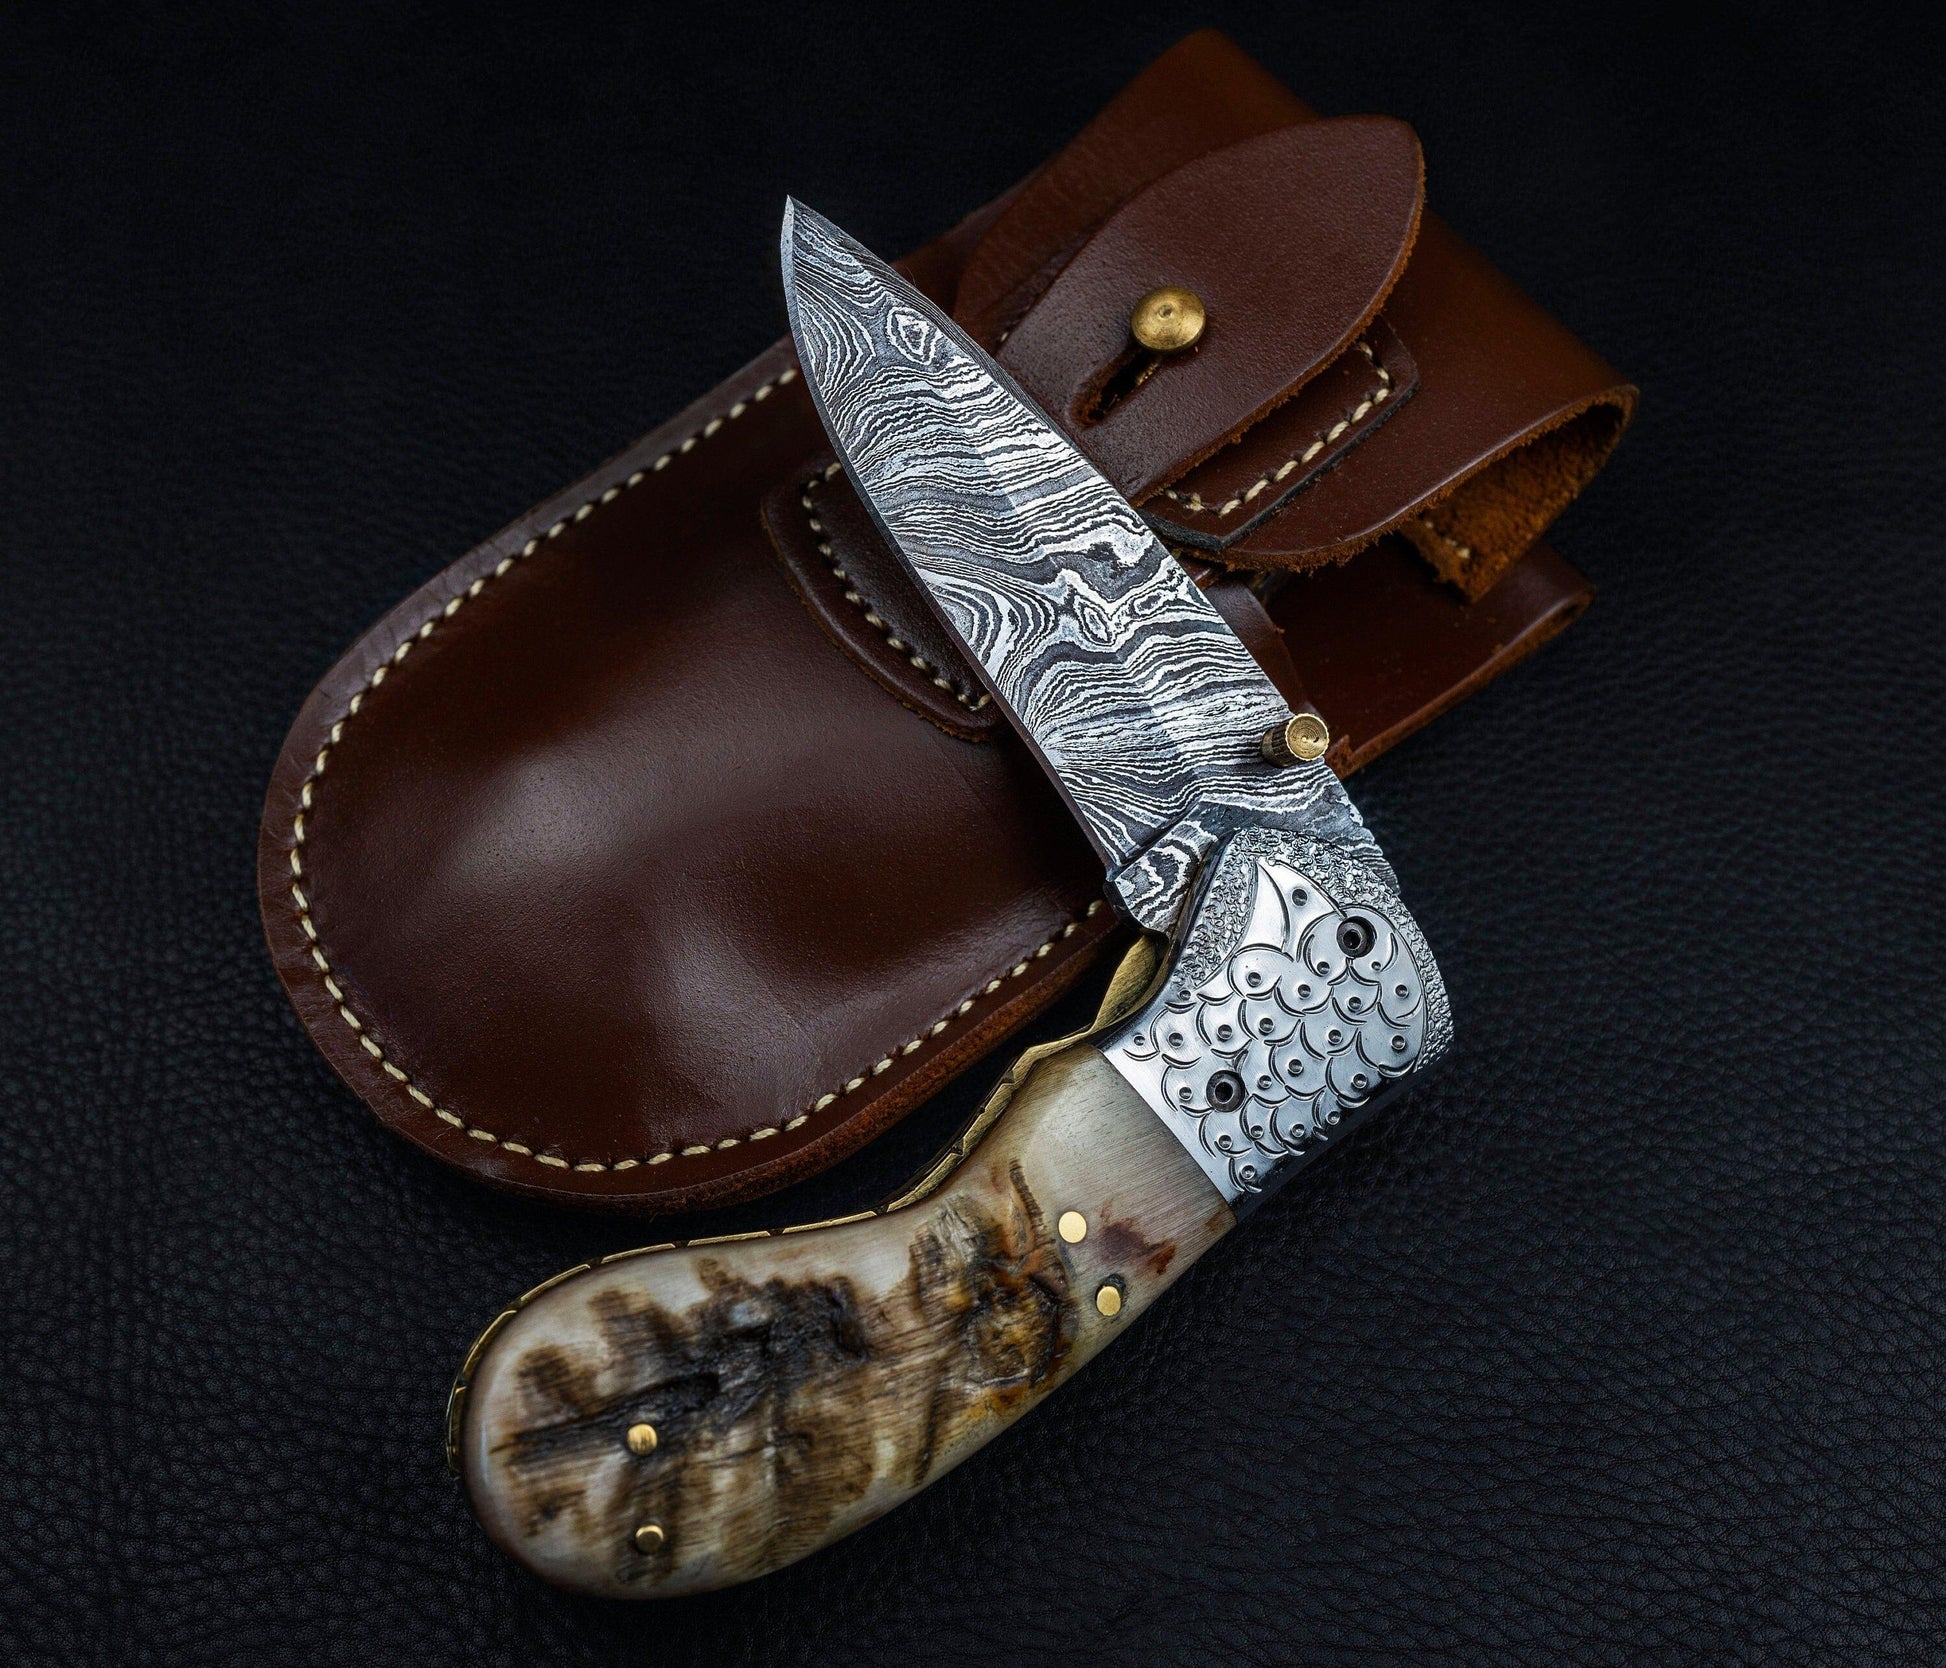 Hand Forged Ram Horn Handle Eagle Damascus Folding Knife, Damascus Pocket Knife, Damascus Steel Hunting knife, Hand Forged Damascus Knife Etsy 